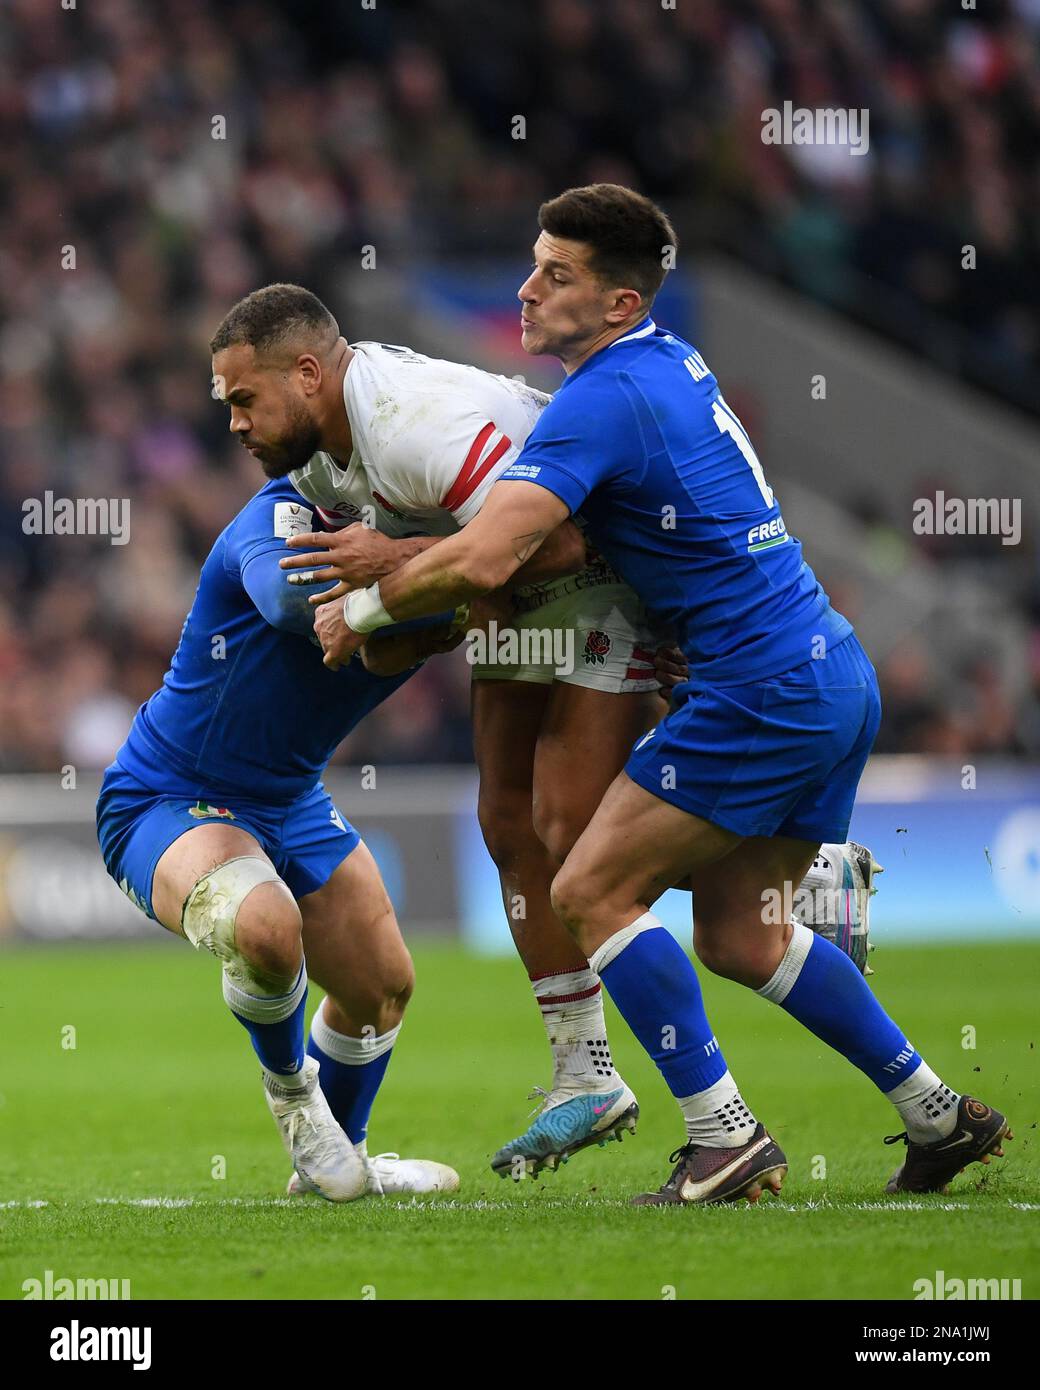 2023 Guinness Six Nations, Twickenham Stadium, England, UK. 12th February, 2023. England's Ollie Lawrence is tackled by Italy's Tommaso Allan (r) during the 2023 Guinness Six Nations match between England and Italy: Credit: Ashley Western/Alamy Live News Stock Photo